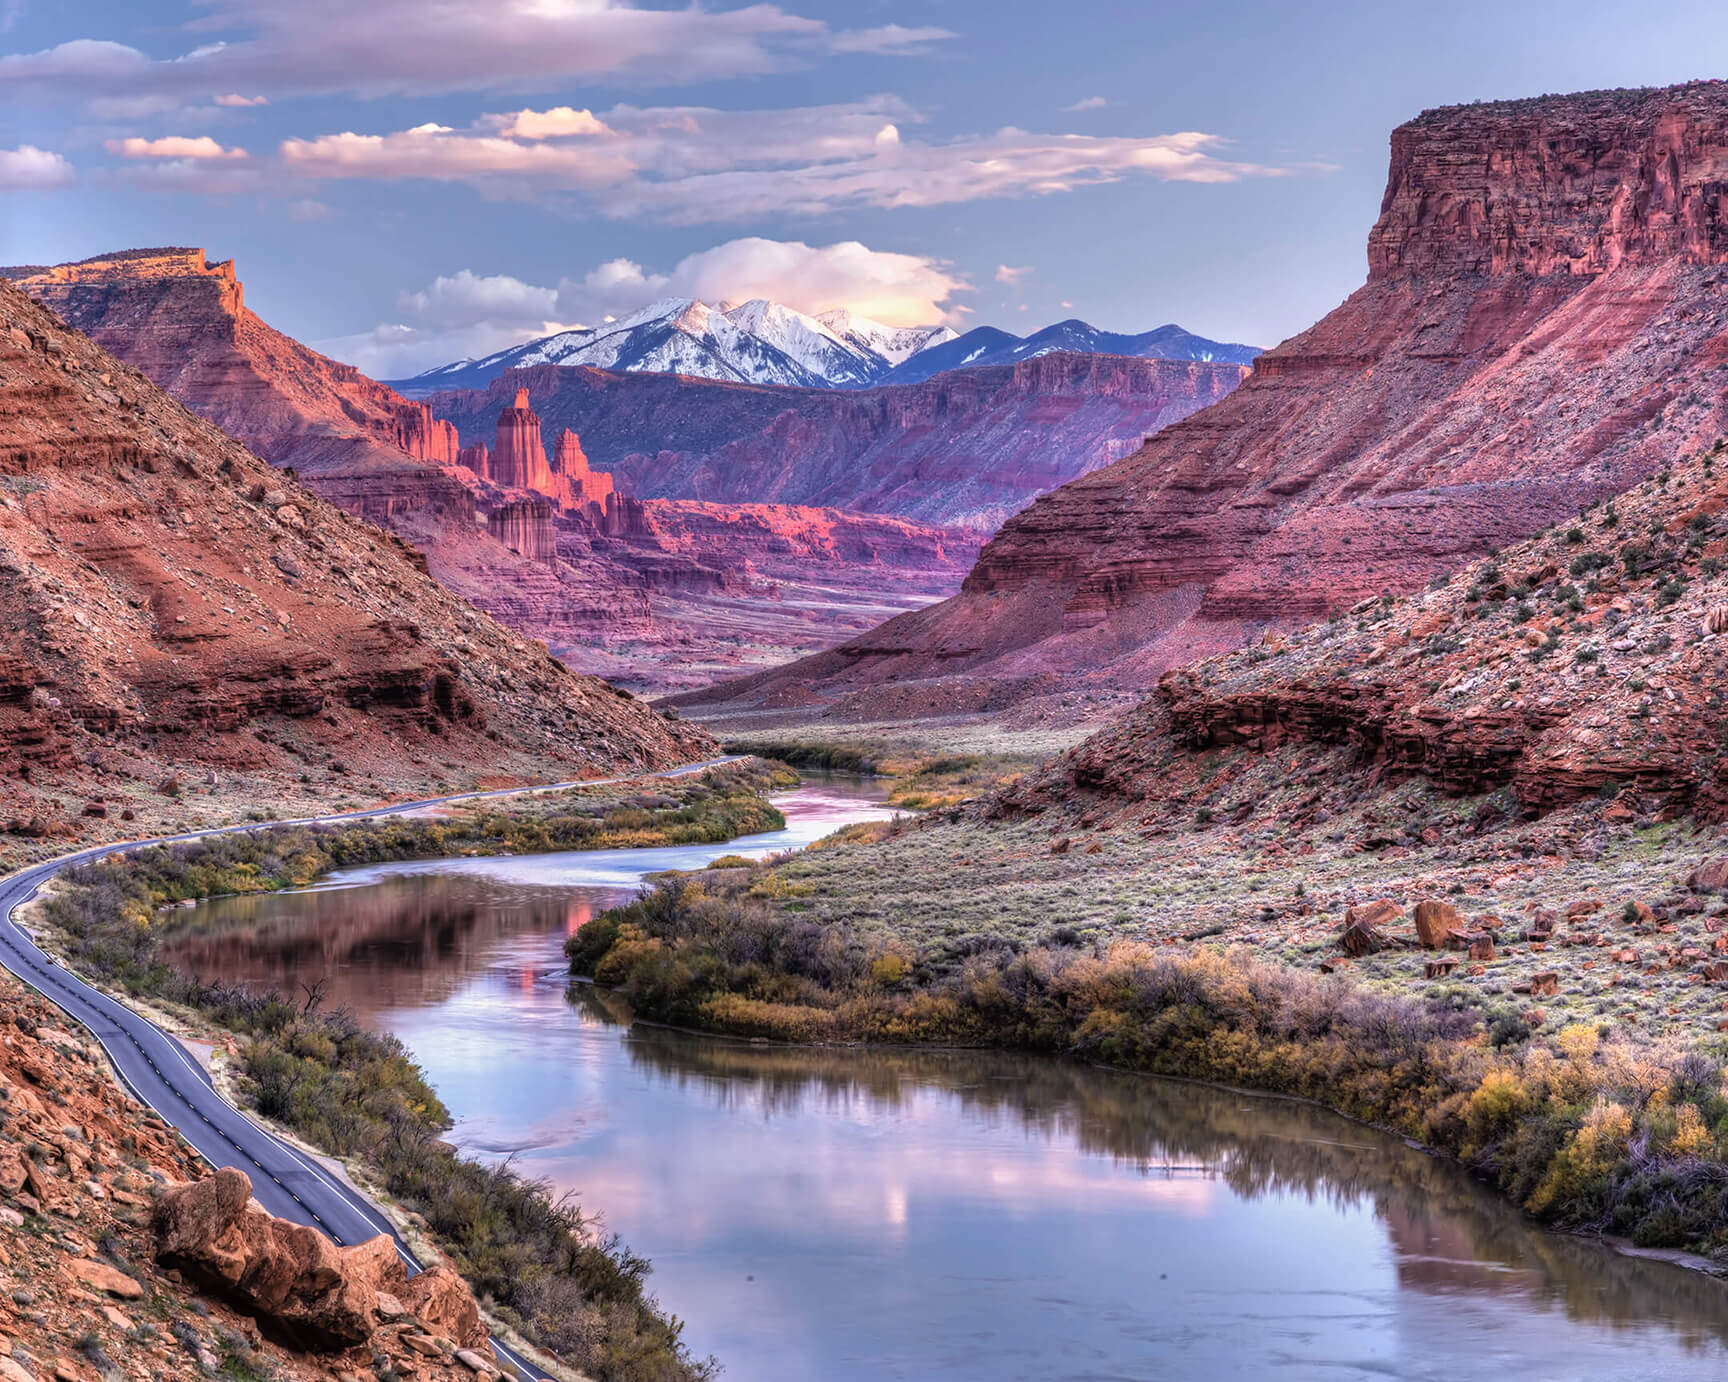 The Colorado River and Fisher Towers near Castle Valley, Utah, with the La Sal Mountains in the background.